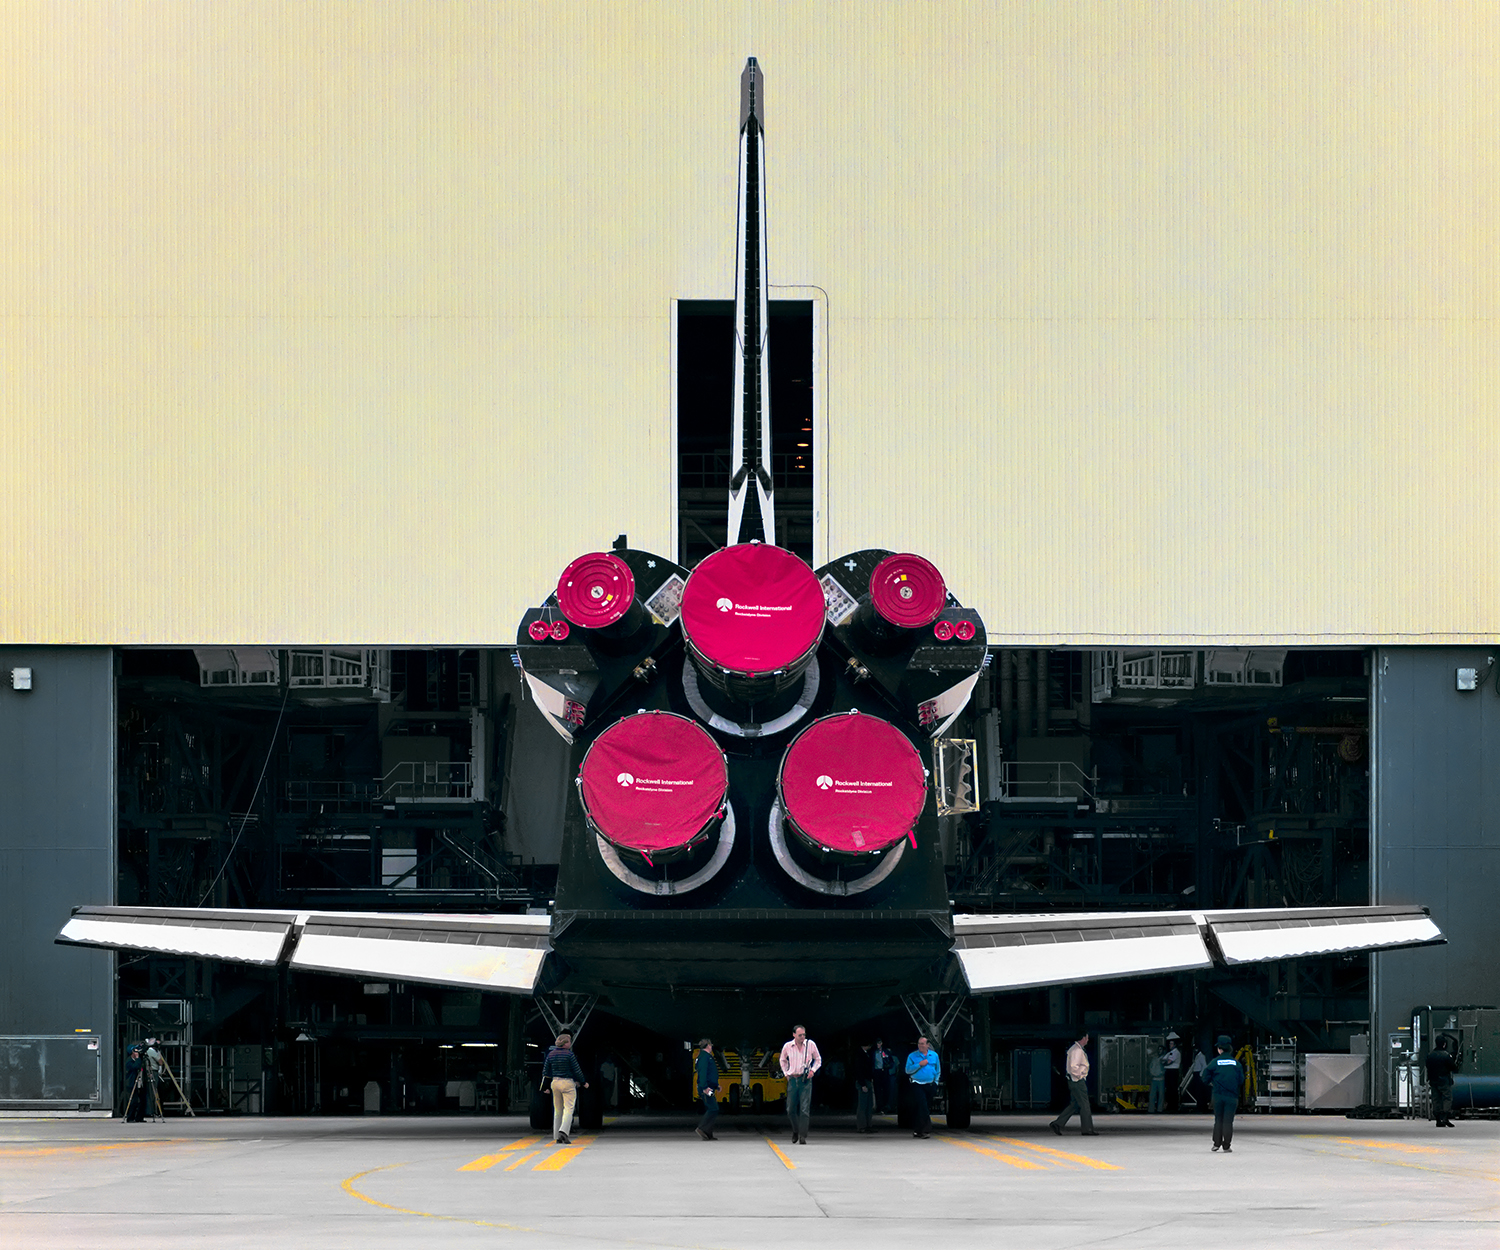  John Chakeres  Challenger, Roll Over Orbiter Processing Facility, 1985 